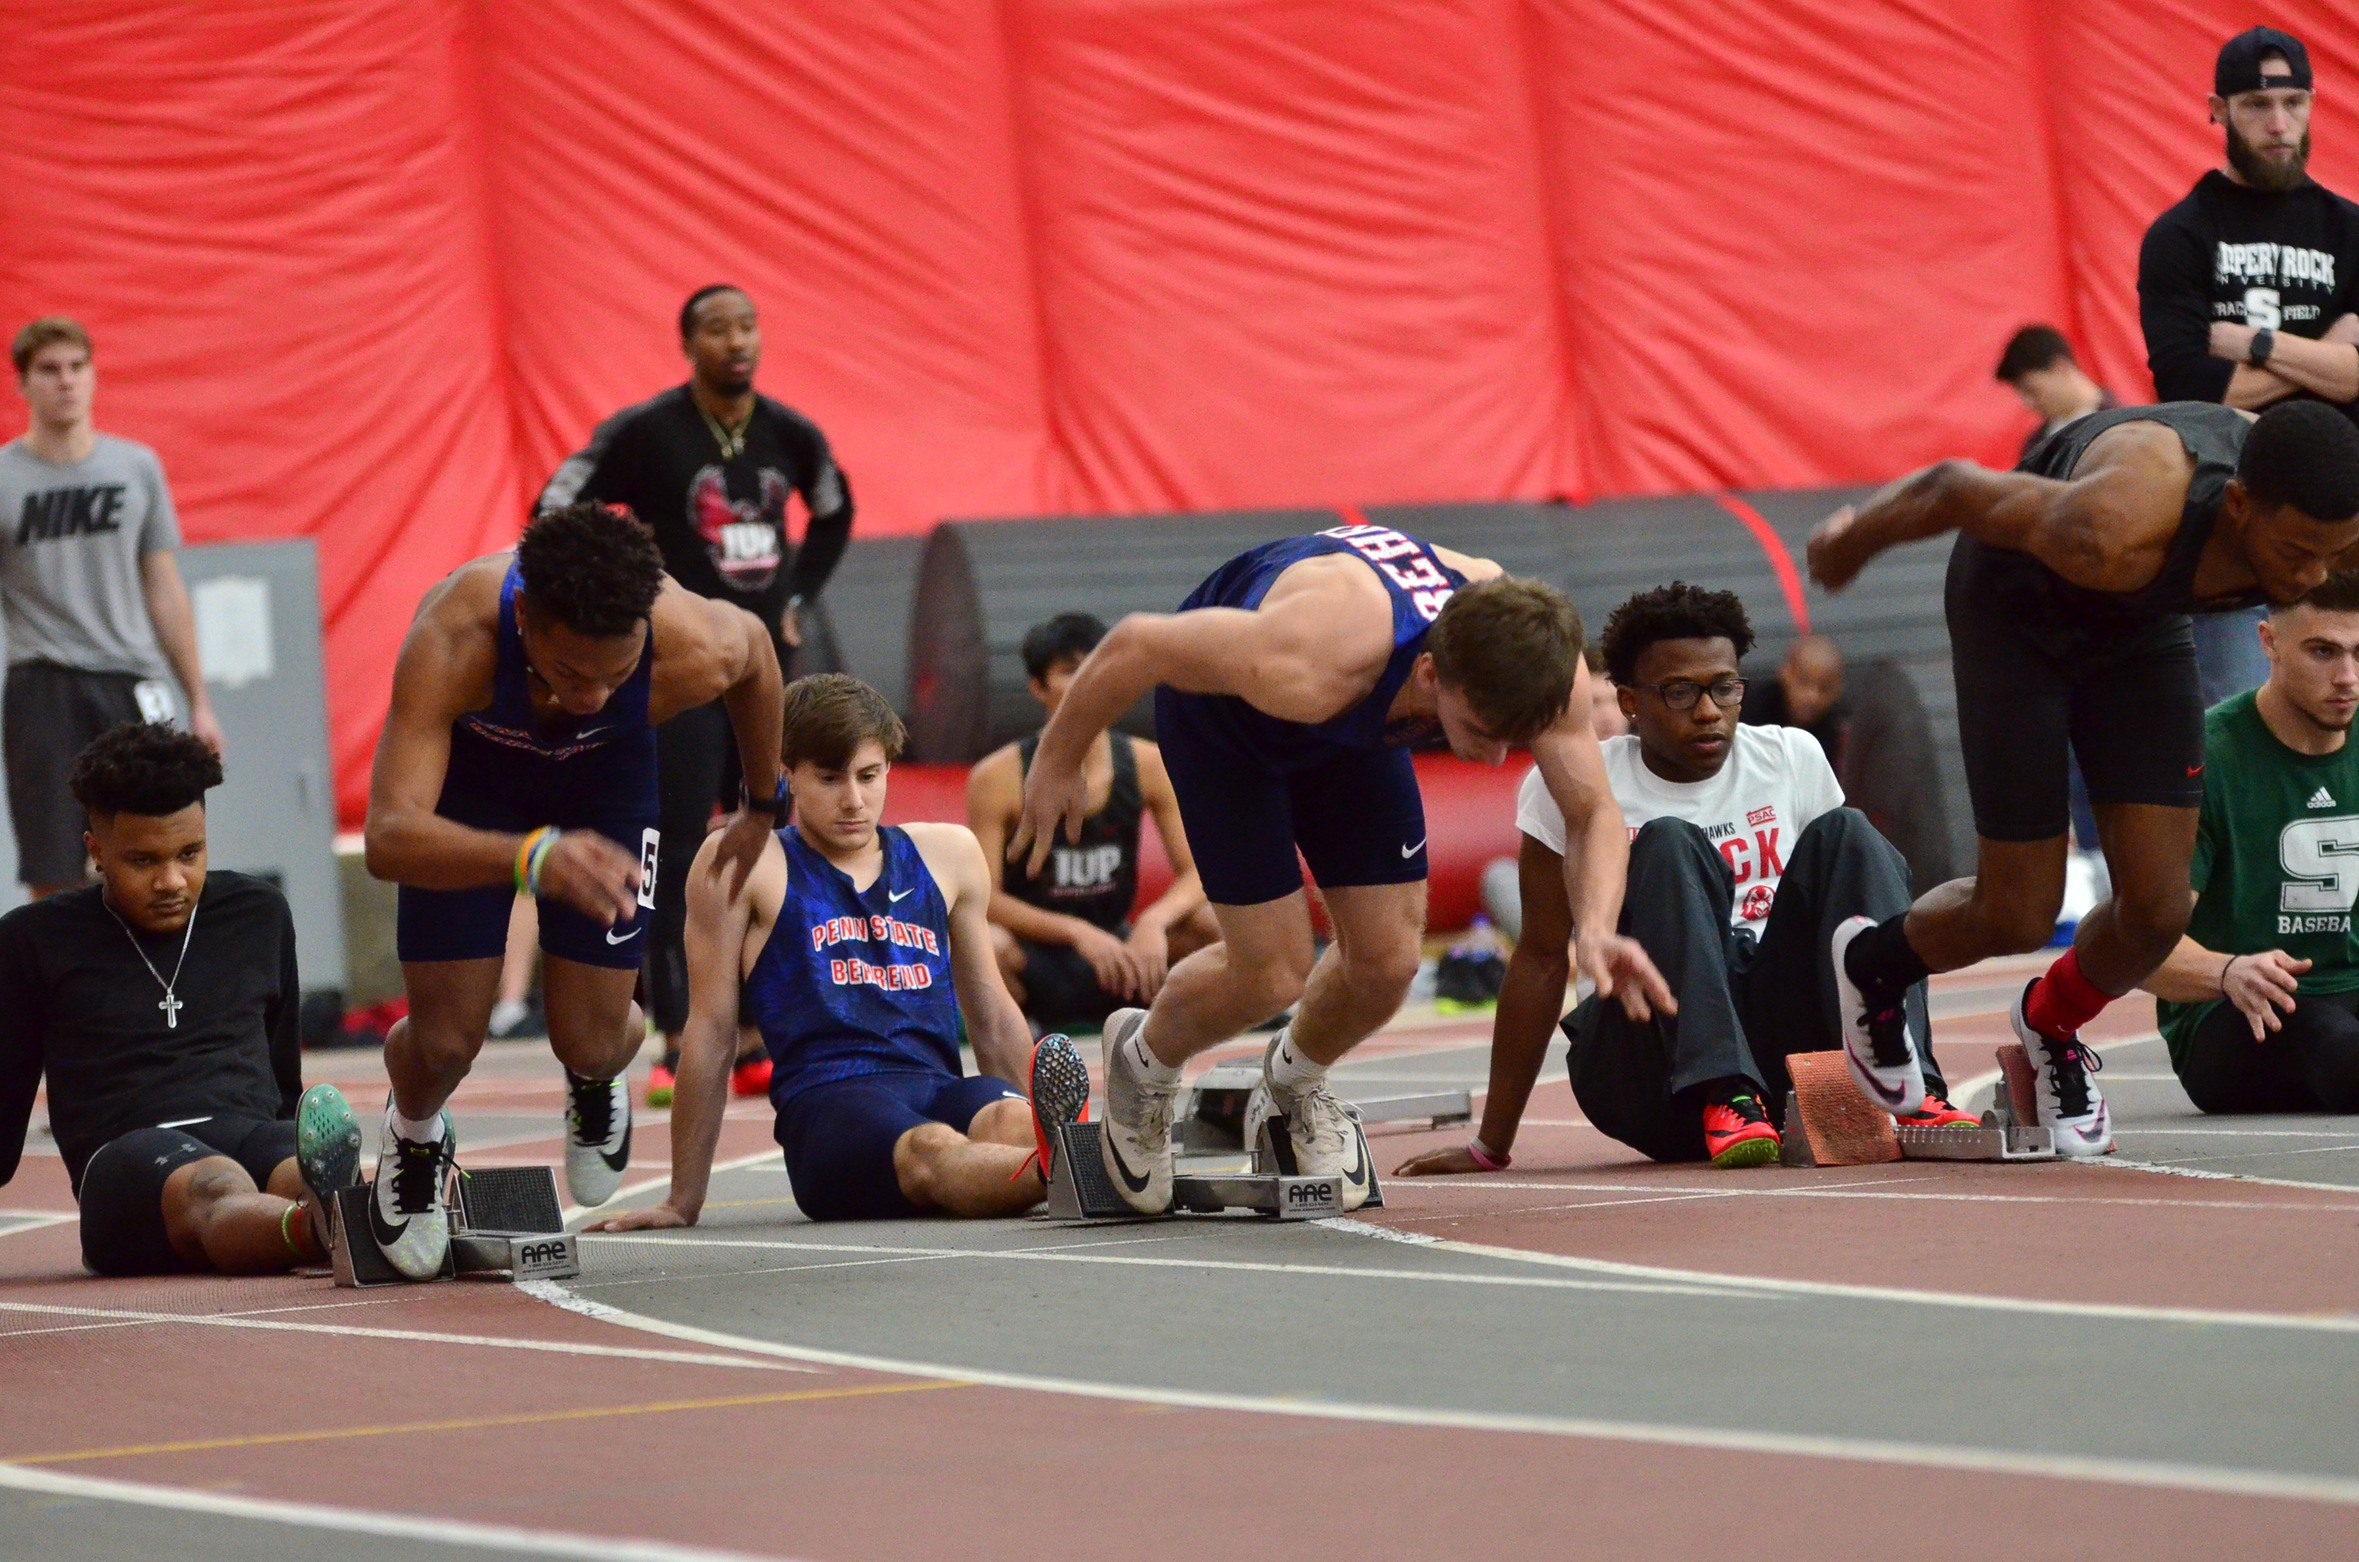 Men's Track and Field Travels to Slippery Rock Saturday